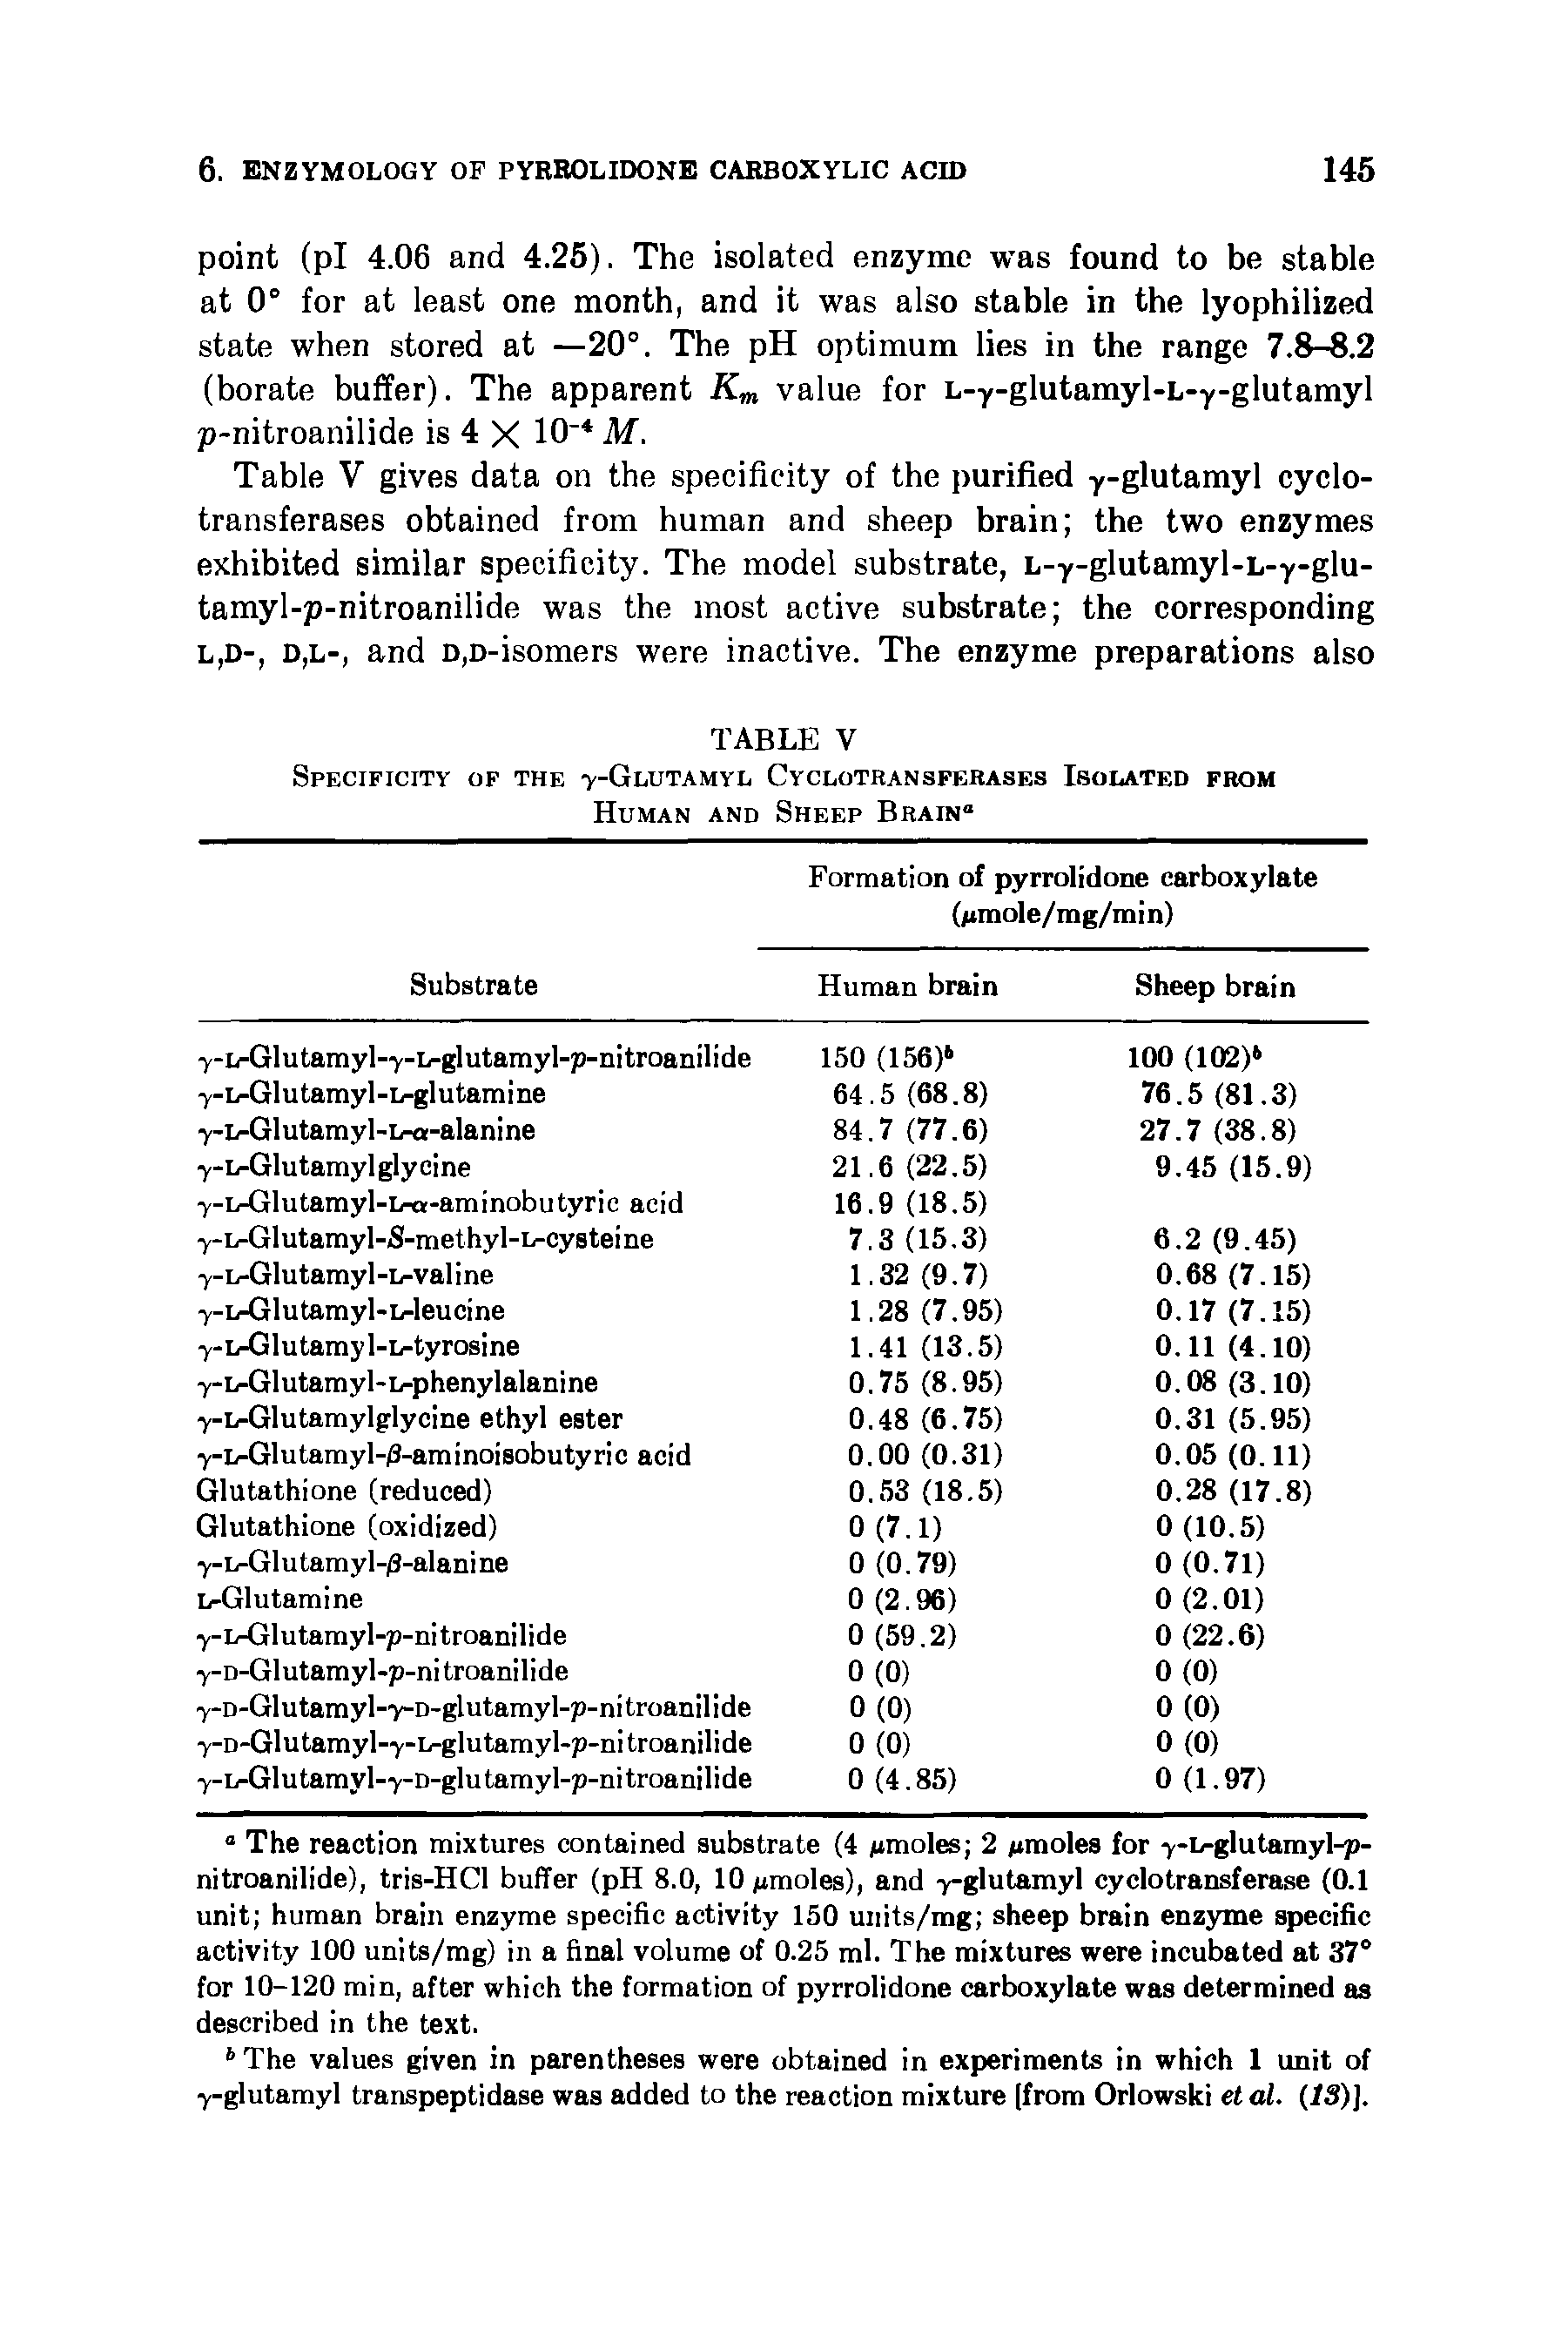 Table V gives data on the specificity of the purified y-glutamyl cyclotransferases obtained from human and sheep brain the two enzymes exhibited similar specificity. The model substrate, L-y-glutamyl-L-y-glu-tamyl-p-nitroanilide was the most active substrate the corresponding l,d-, d,l-, and D,D-isomers were inactive. The enzyme preparations also...